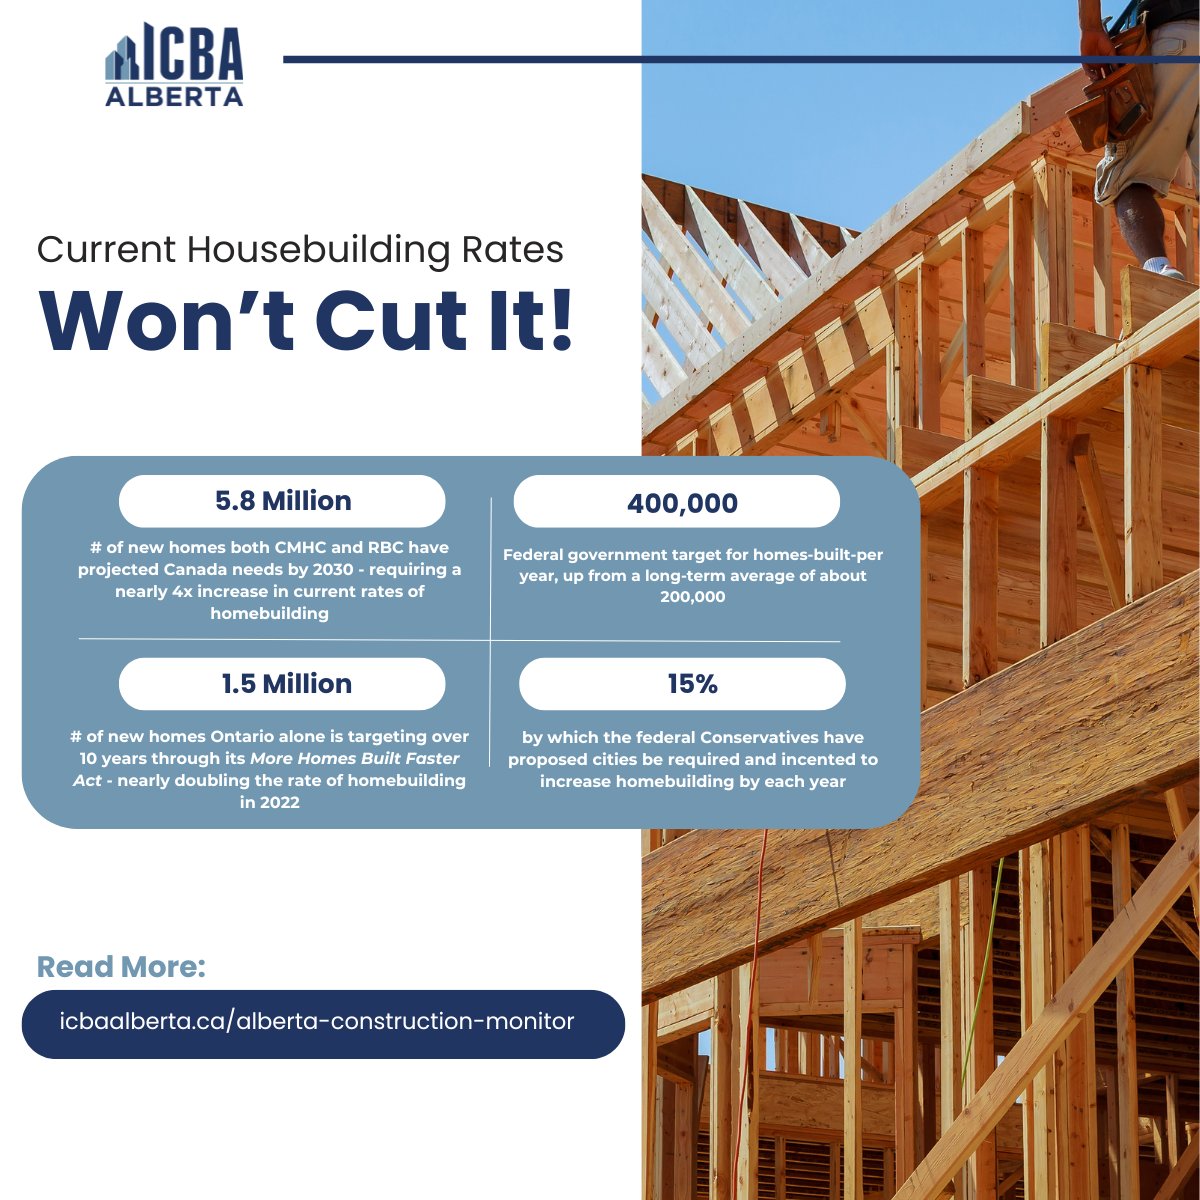 🏠Alberta is leading the country in housing starts, and we need to do so much more. Canada’s projected need for 5.8 million new homes by 2030 demands a nearly 4X increase in current homebuilding rates. #HousingAffordability #ConstructionTrends